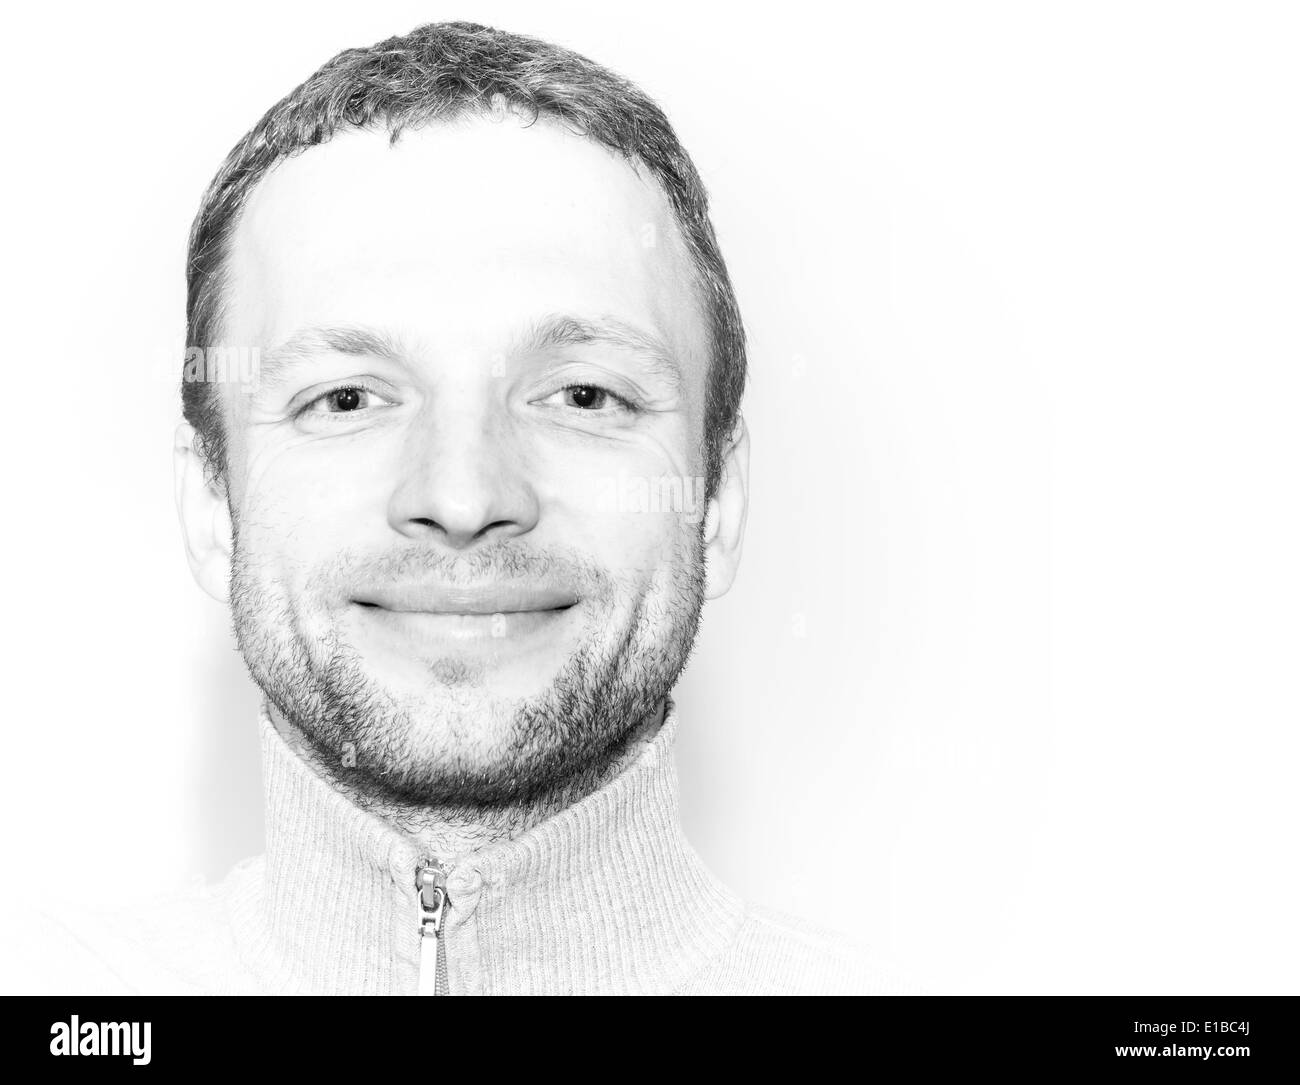 Smiling young Caucasian Man, closeup black and white portrait Stock Photo